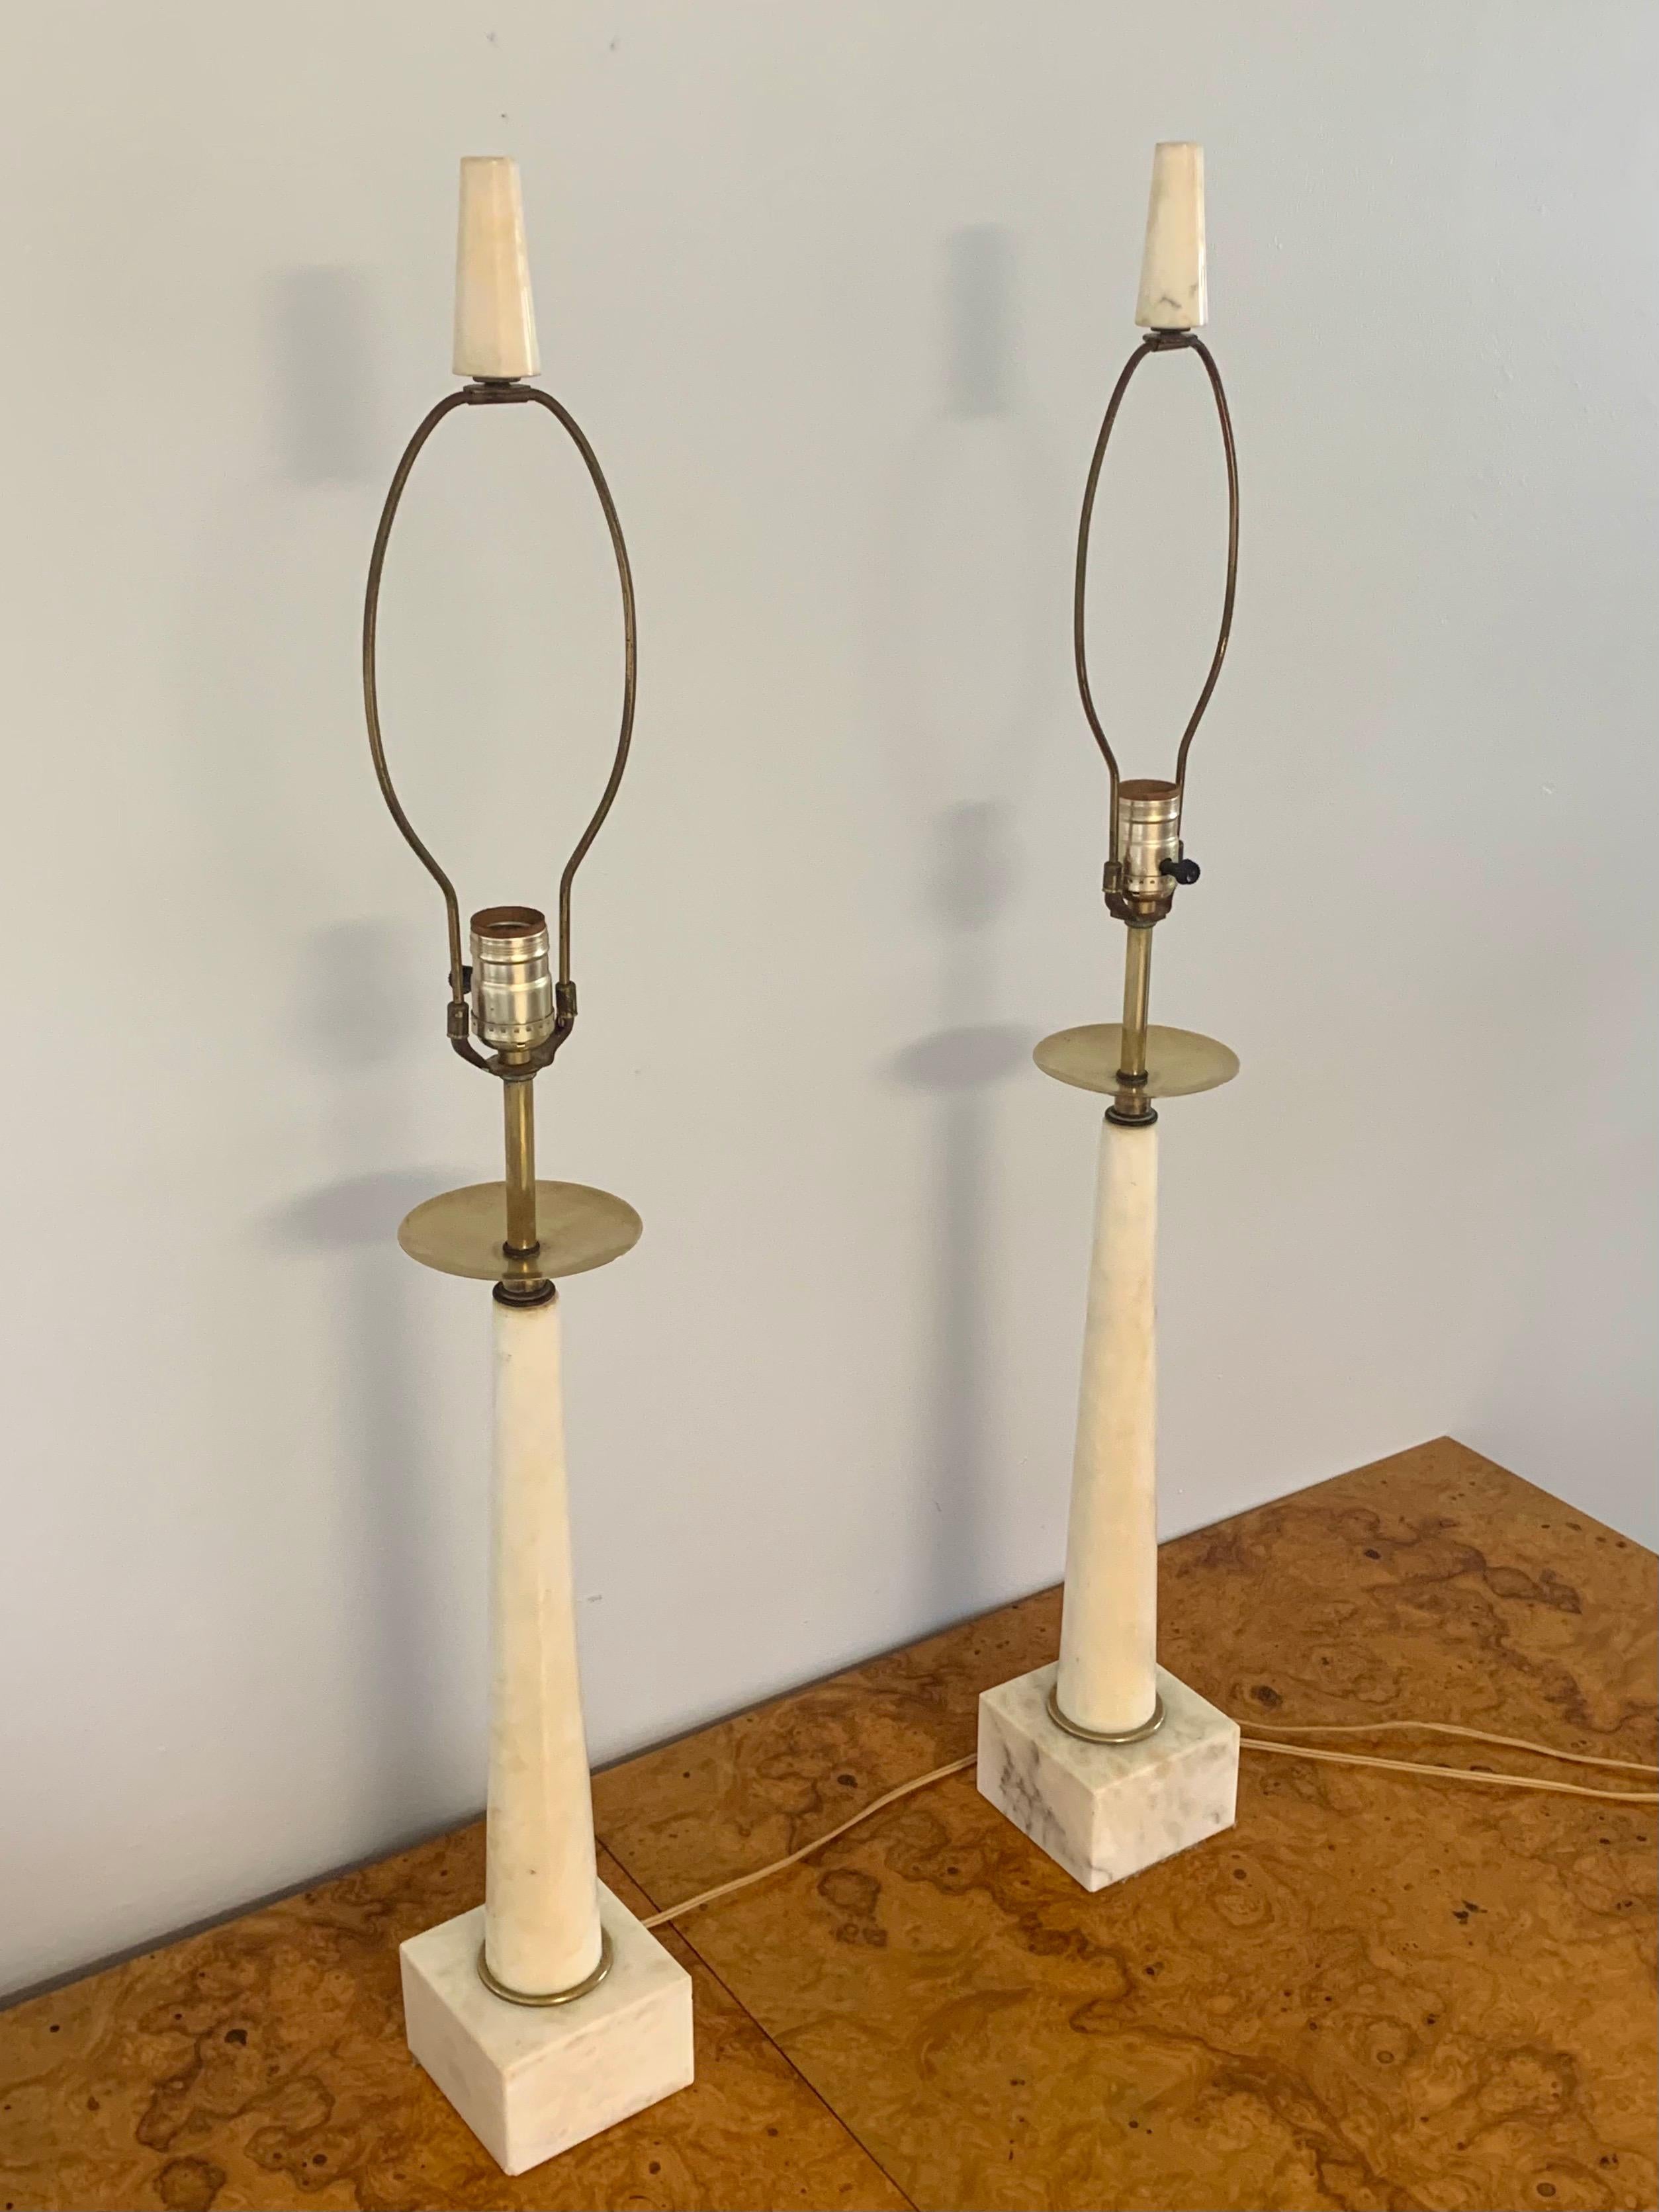 Stunning pair of Italian marble and brass table lamps. In the style of Tommi Parzinger for Stiffel. Gorgeous elegant form. Marble has great textures in it. Original harp and final. Would fit well in Mid-Century Modern, regency, natural or